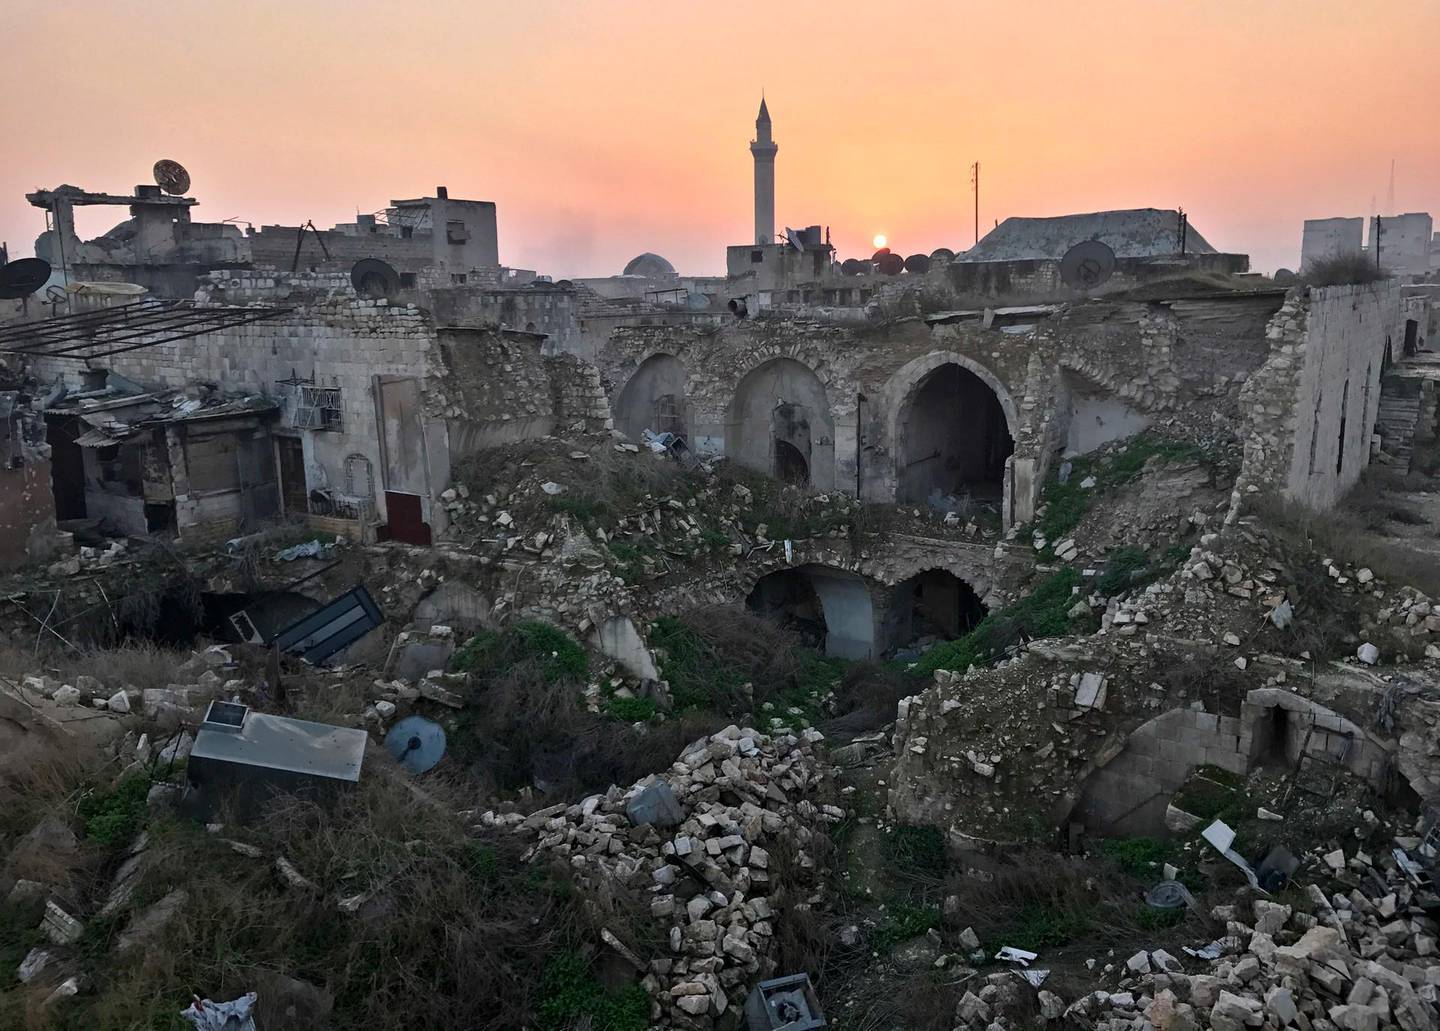 FILE - This Jan. 19, 2017, file photo, shows a general view of the destruction in the old city of Aleppo, Syria. Assad's reputation in the west is shattered, his nation is a smoldering ruin and around half the country is controlled by domestic and foreign militias. But through it all, Assad appears to have survived the war, strangely holding on to his seat in at least the near-term.  (AP Photo/Hassan Ammar, File)